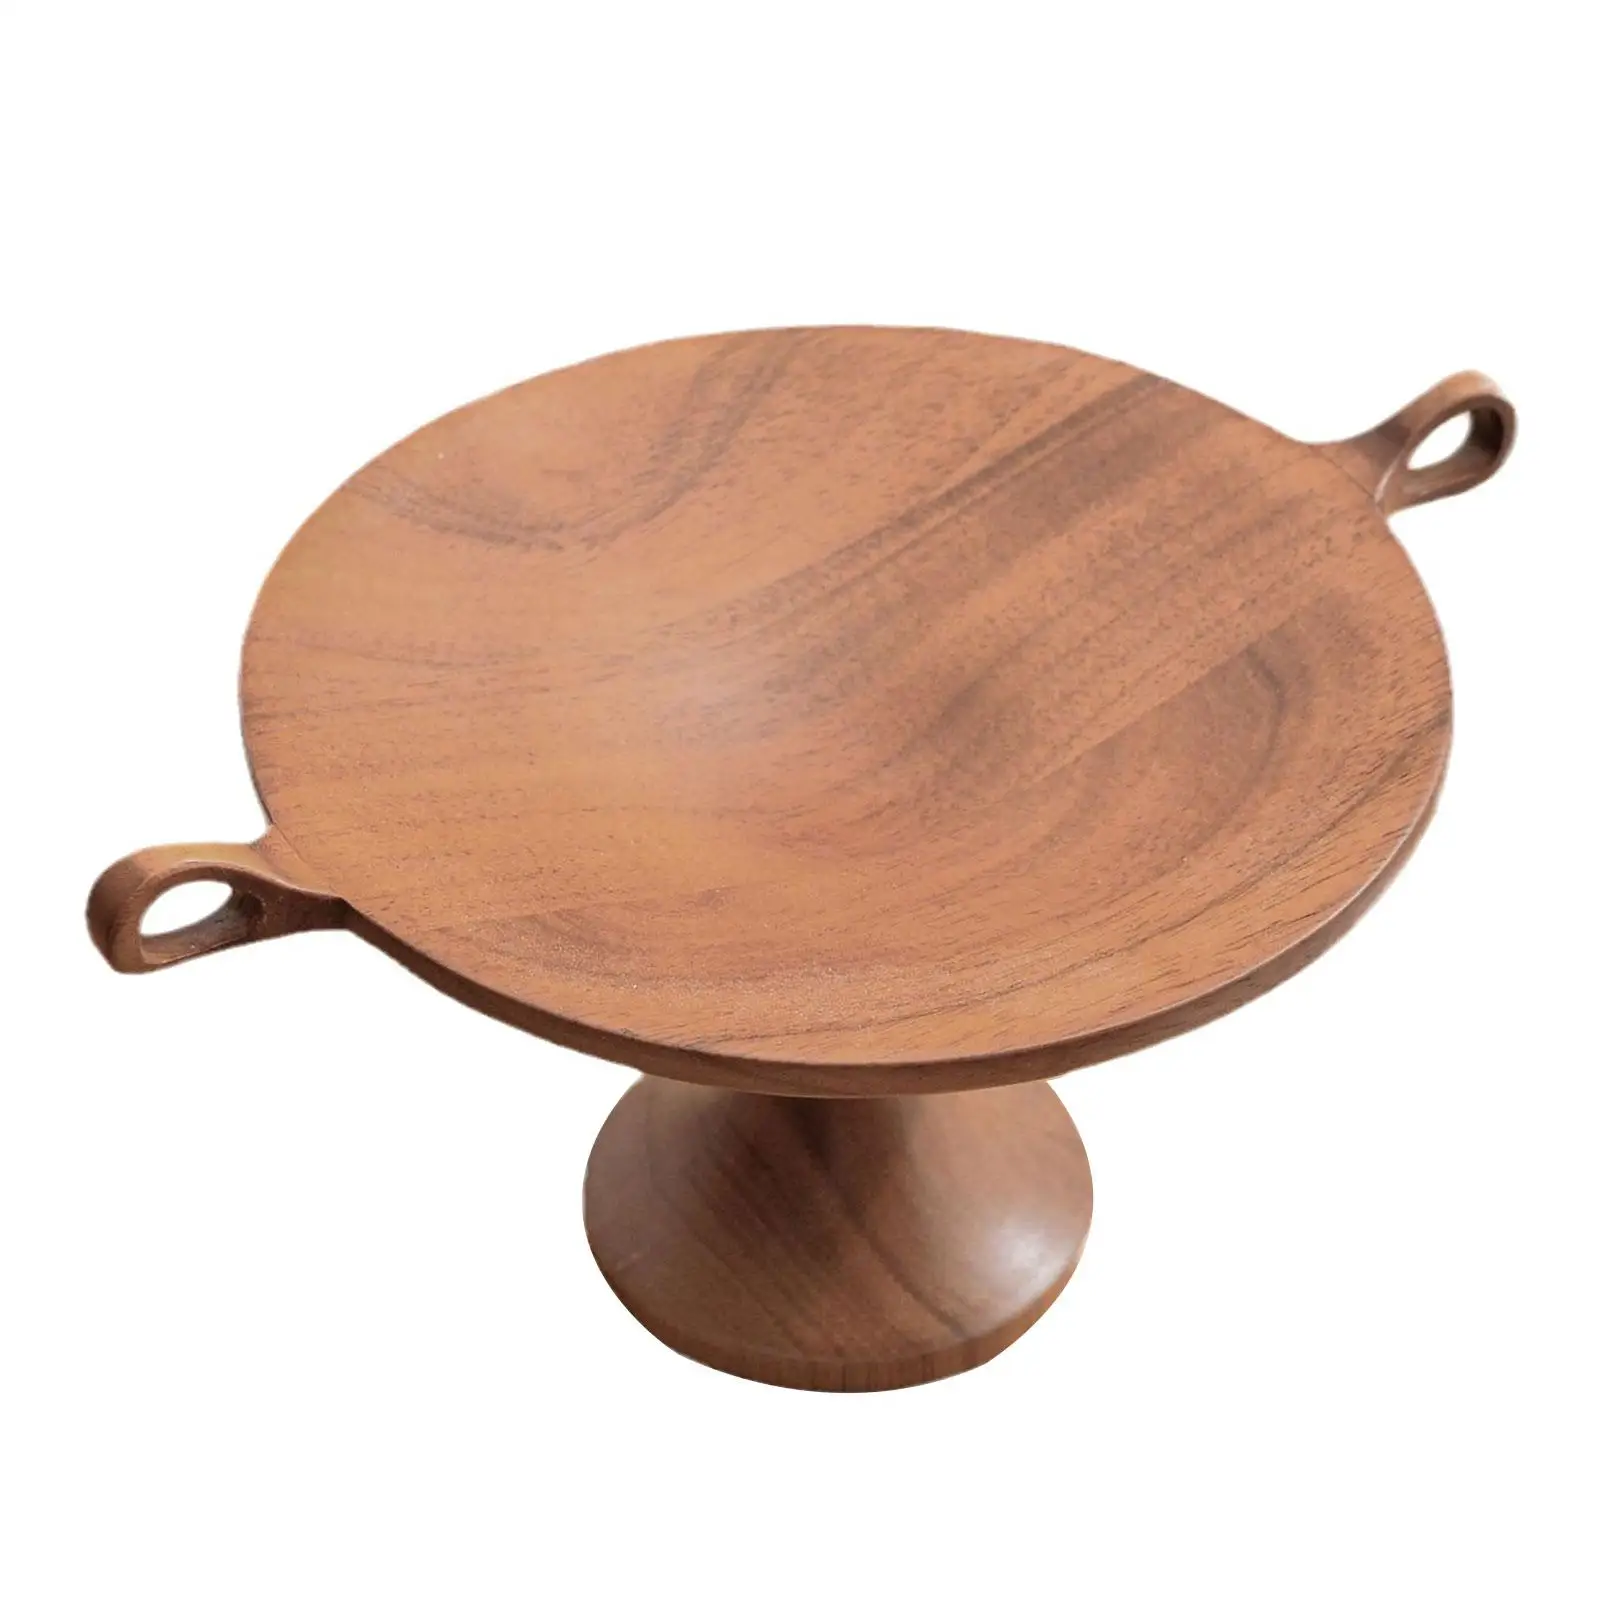 Wood Cake Stand Serving Platter Kitchen Server Tray Reusable Cupcake Holder Wooden High-footed for Cakes Pies Desserts Household